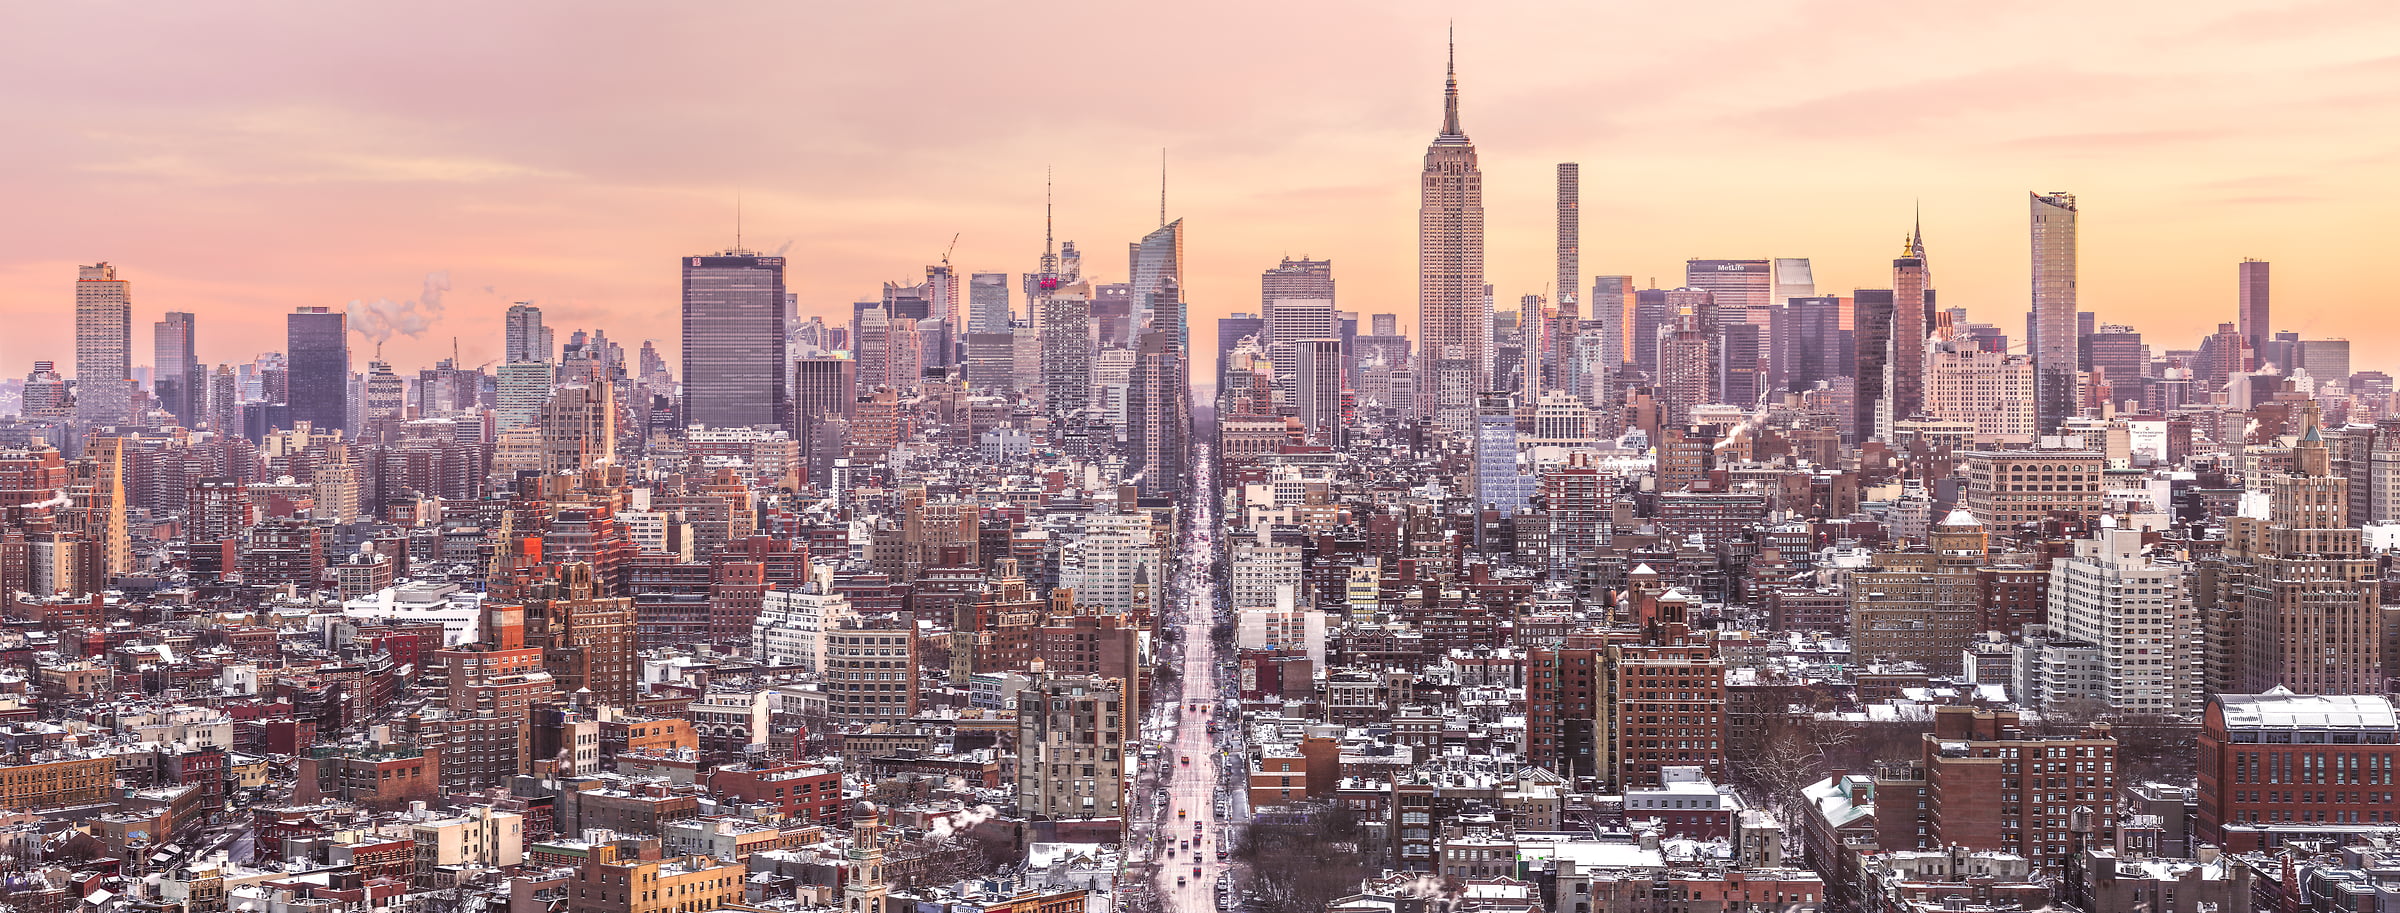 621 megapixels! A very high resolution, large-format VAST photo print of the NYC skyline in winter snow; cityscape sunrise fine art photo created by Dan Piech in New York City.